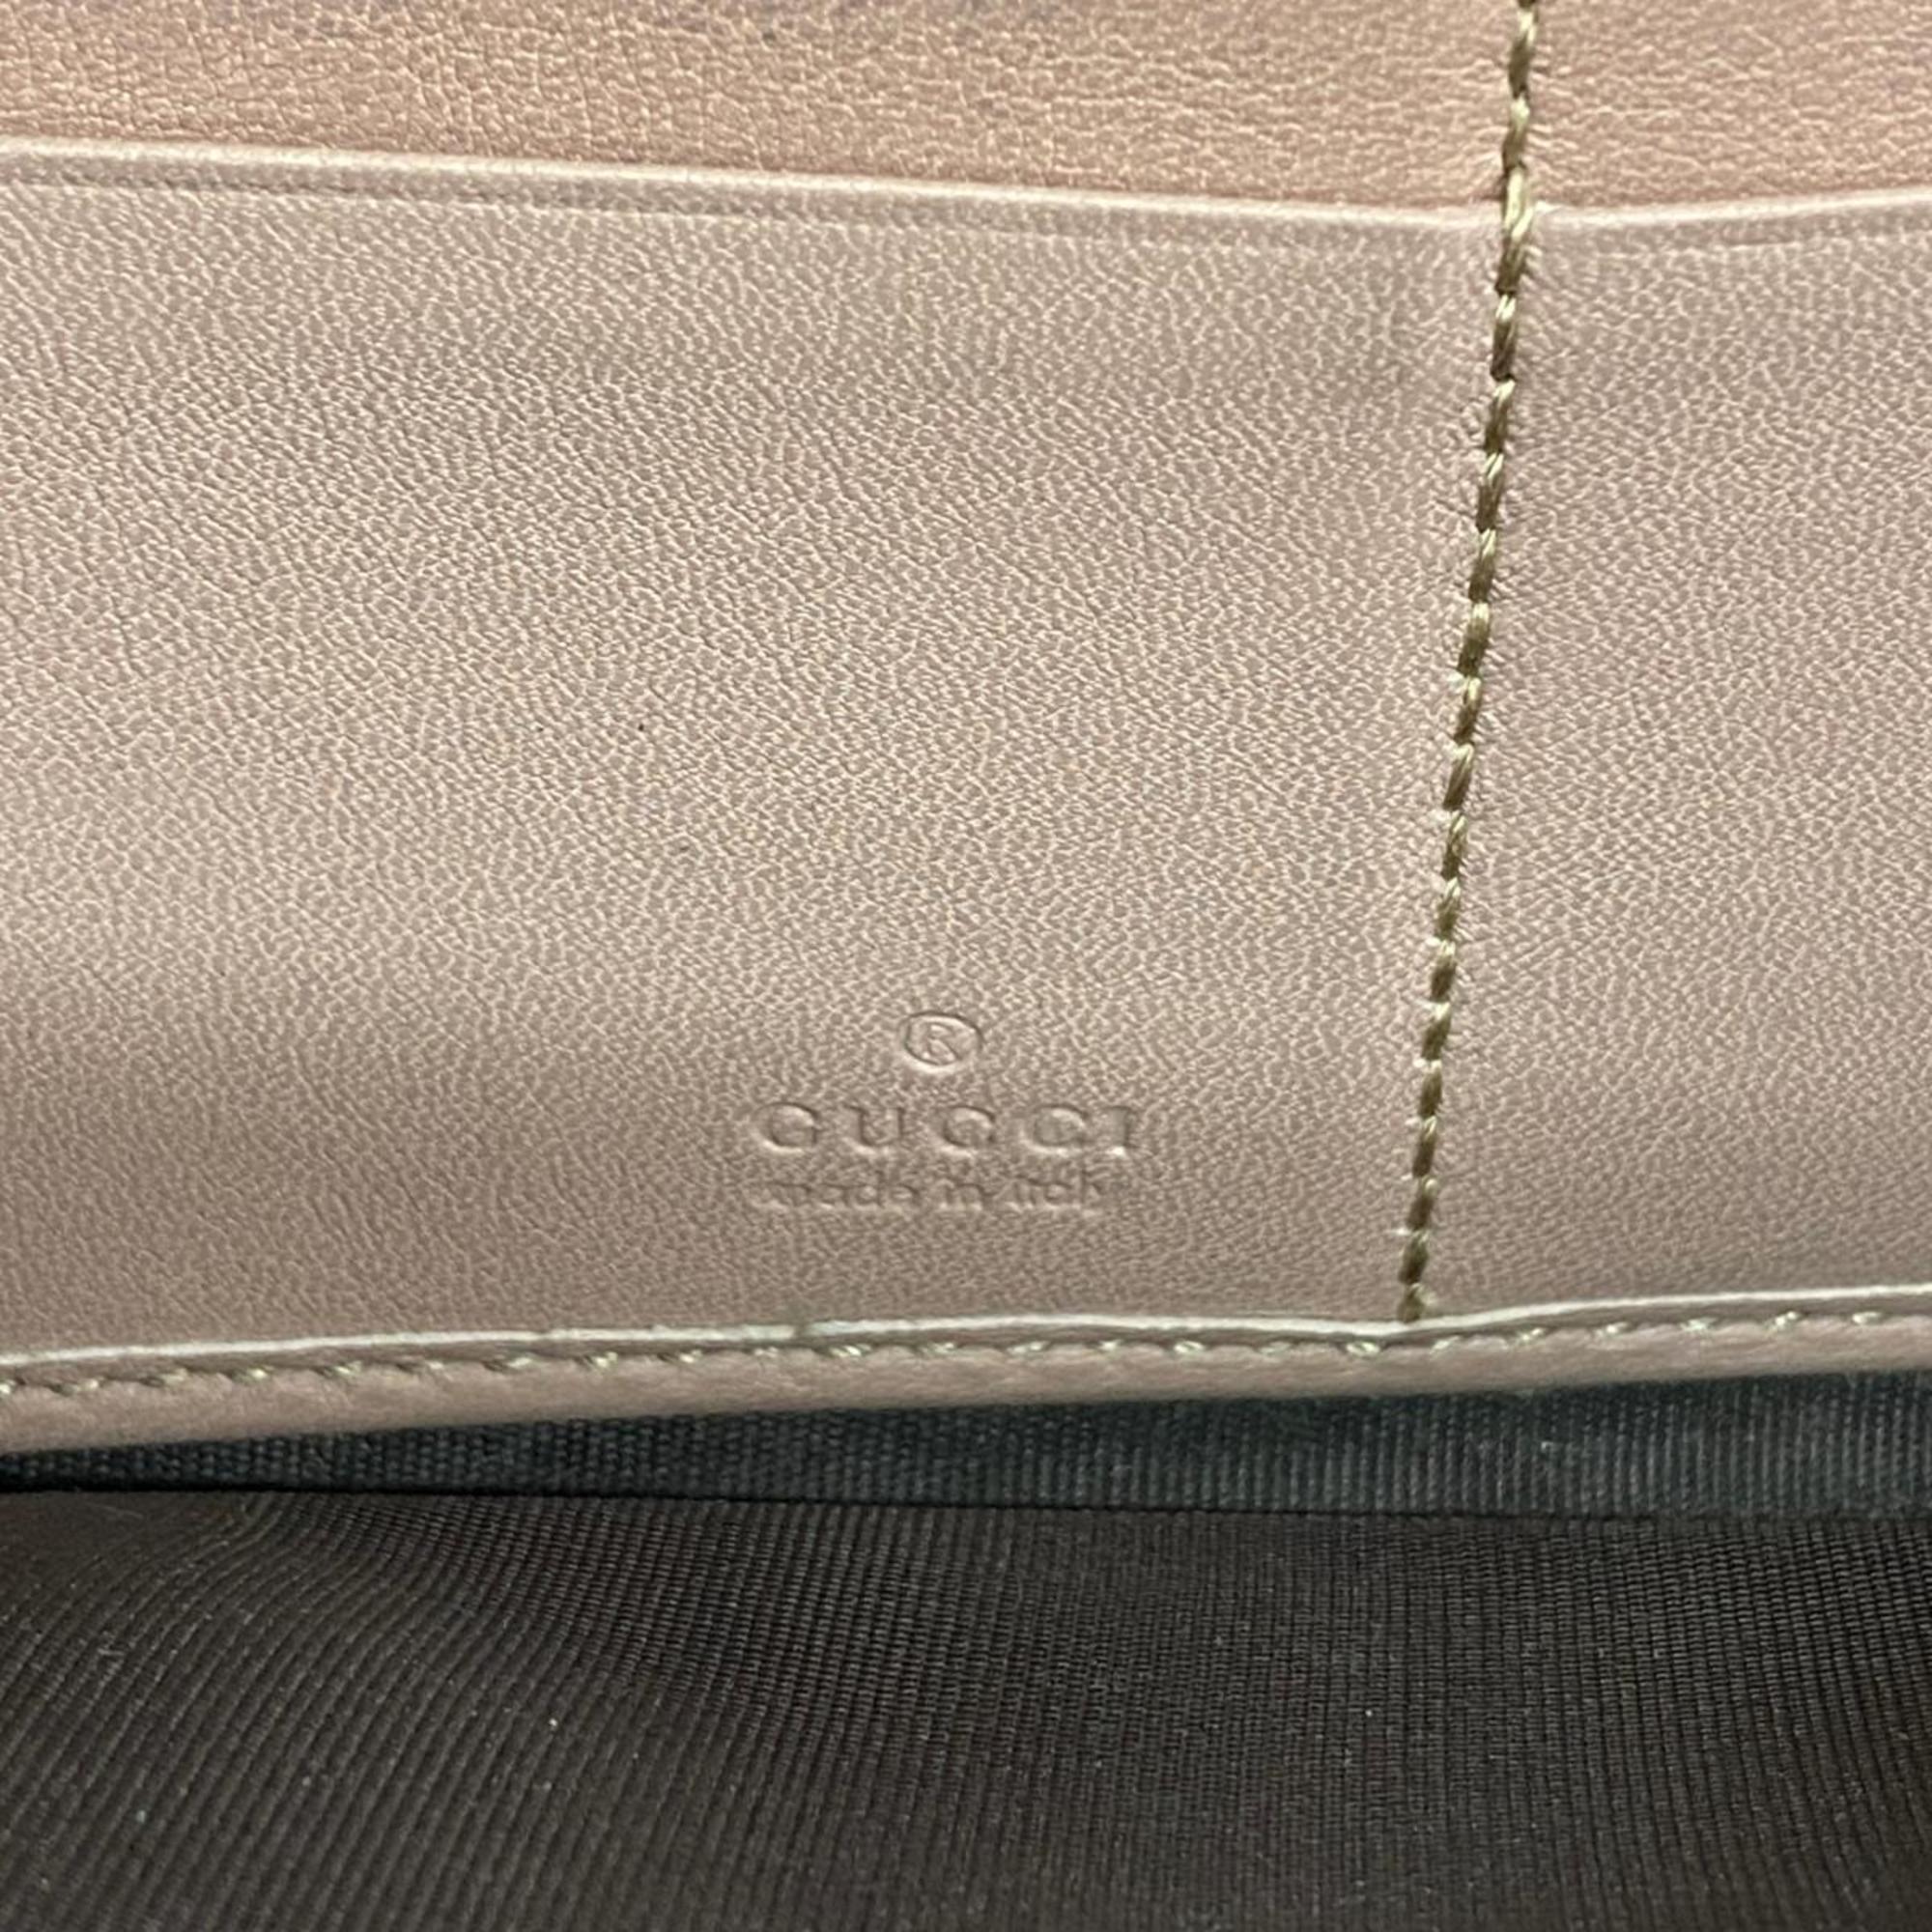 Gucci Long Wallet Guccissima 323397 Leather Pink Beige Champagne Women's